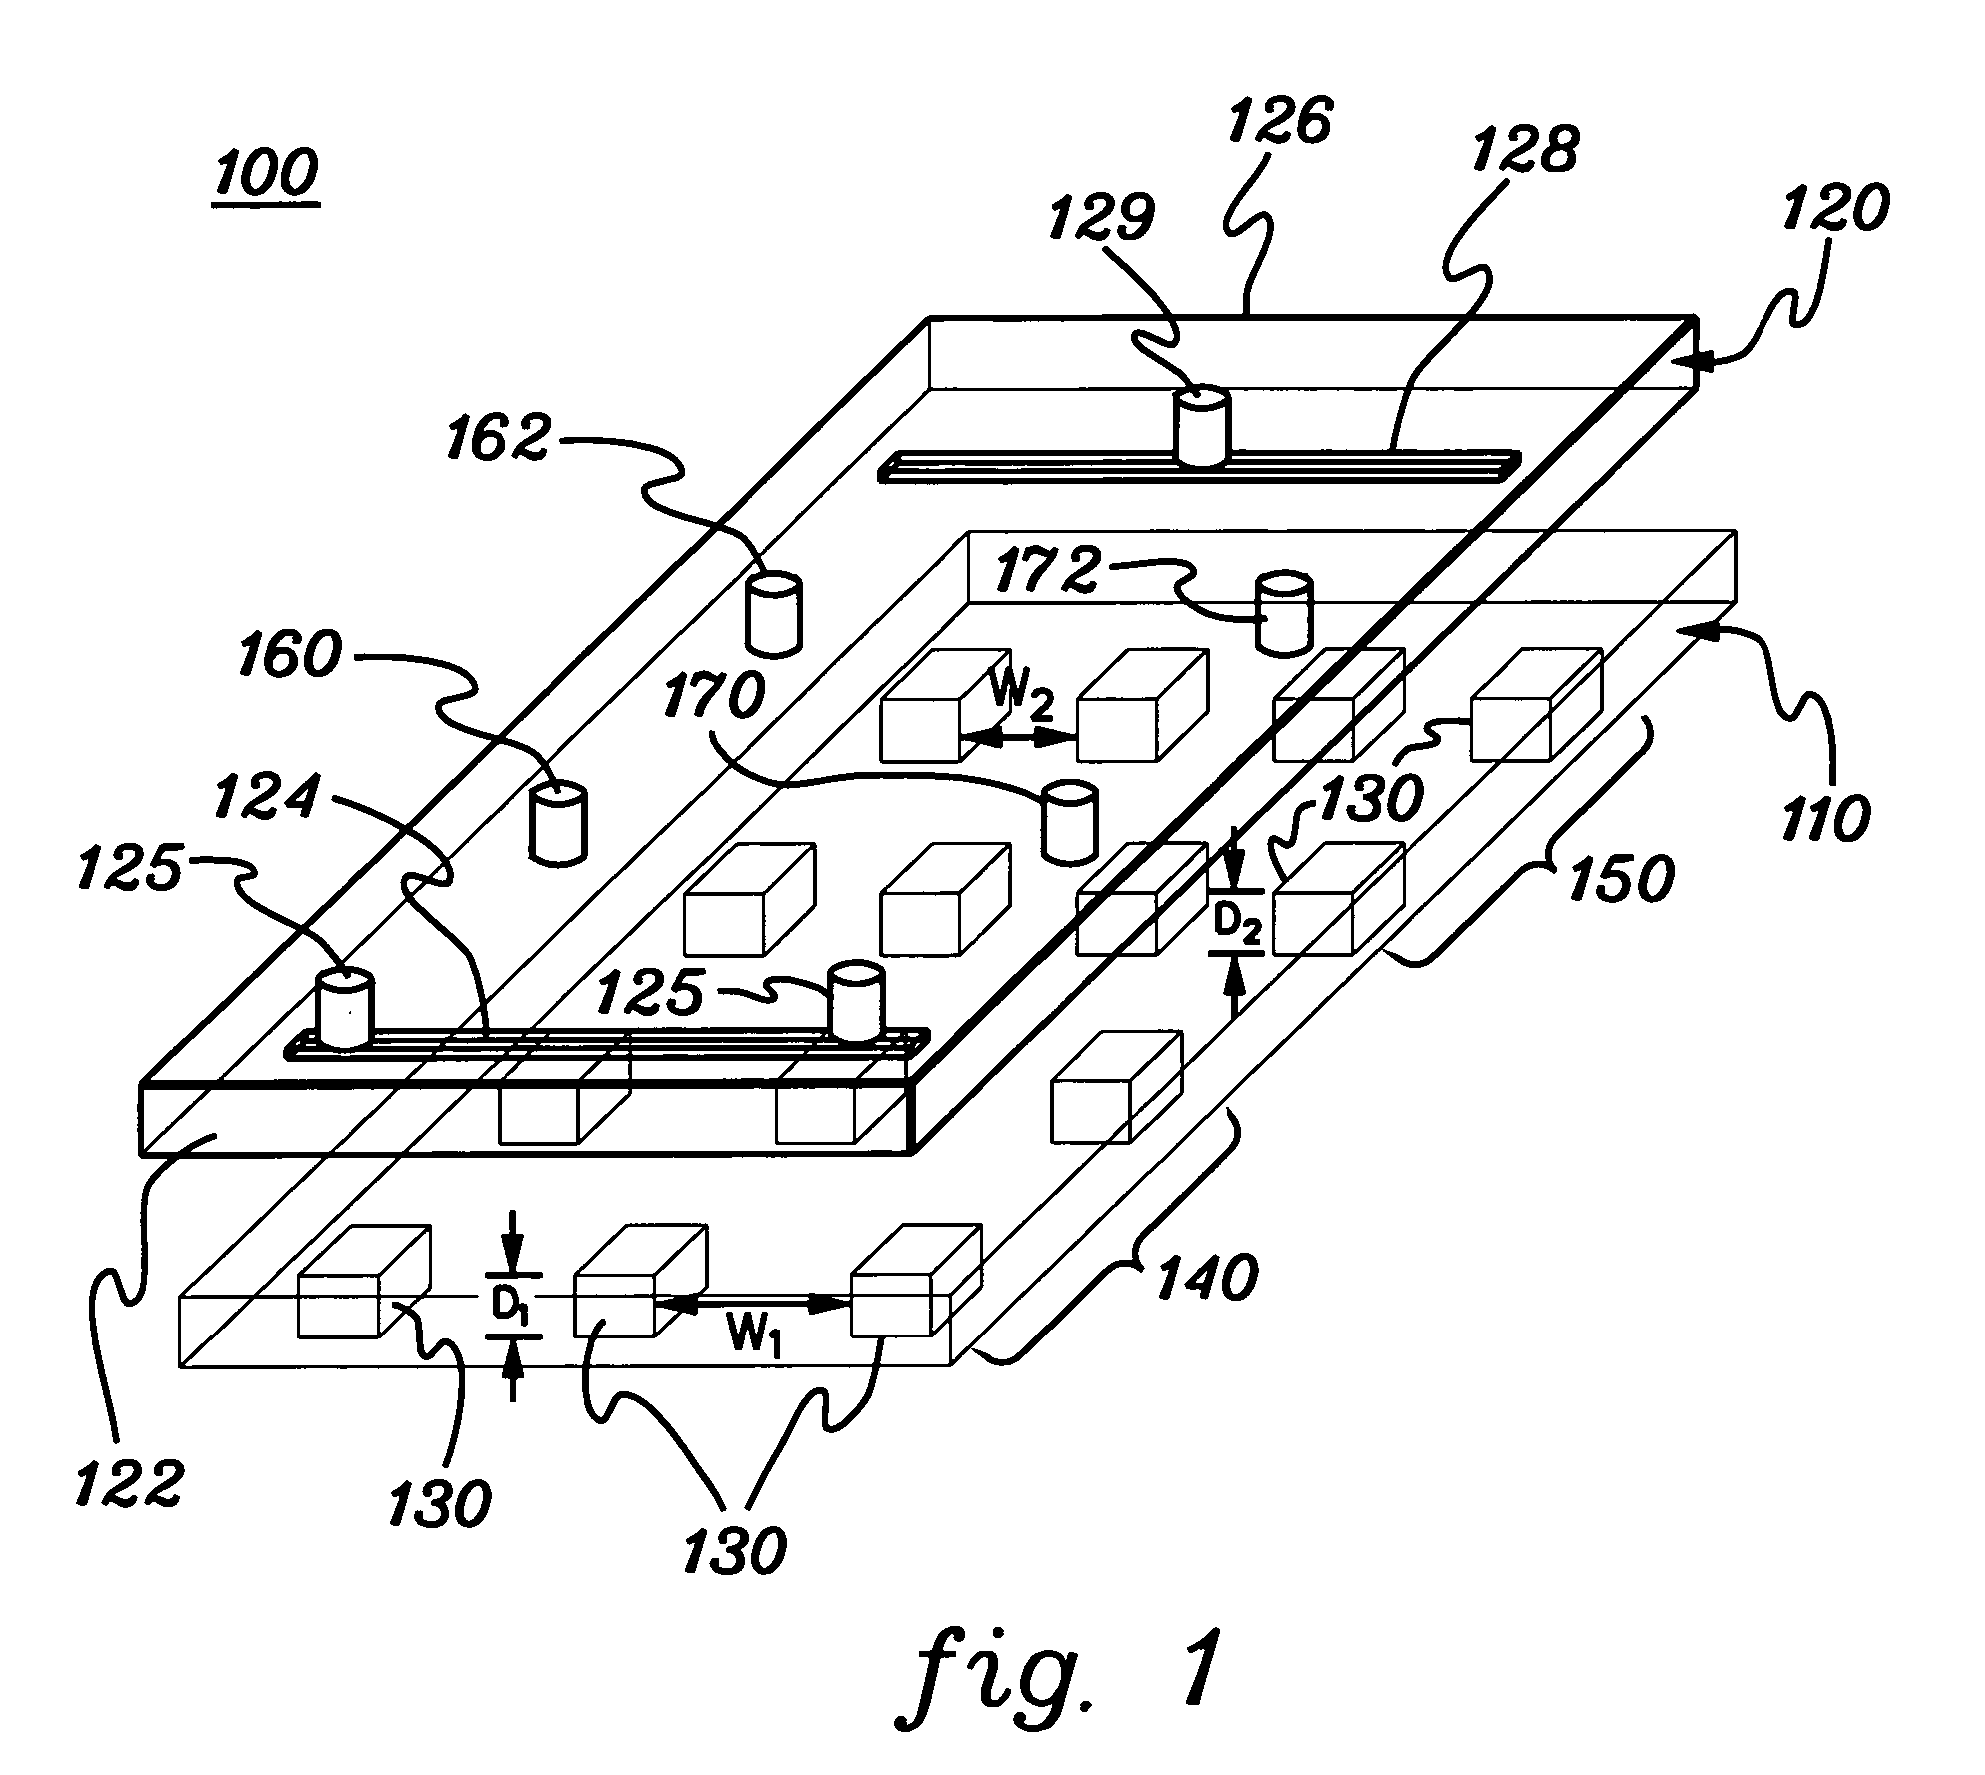 Apparatus and method for sorting microstructures in a fluid medium